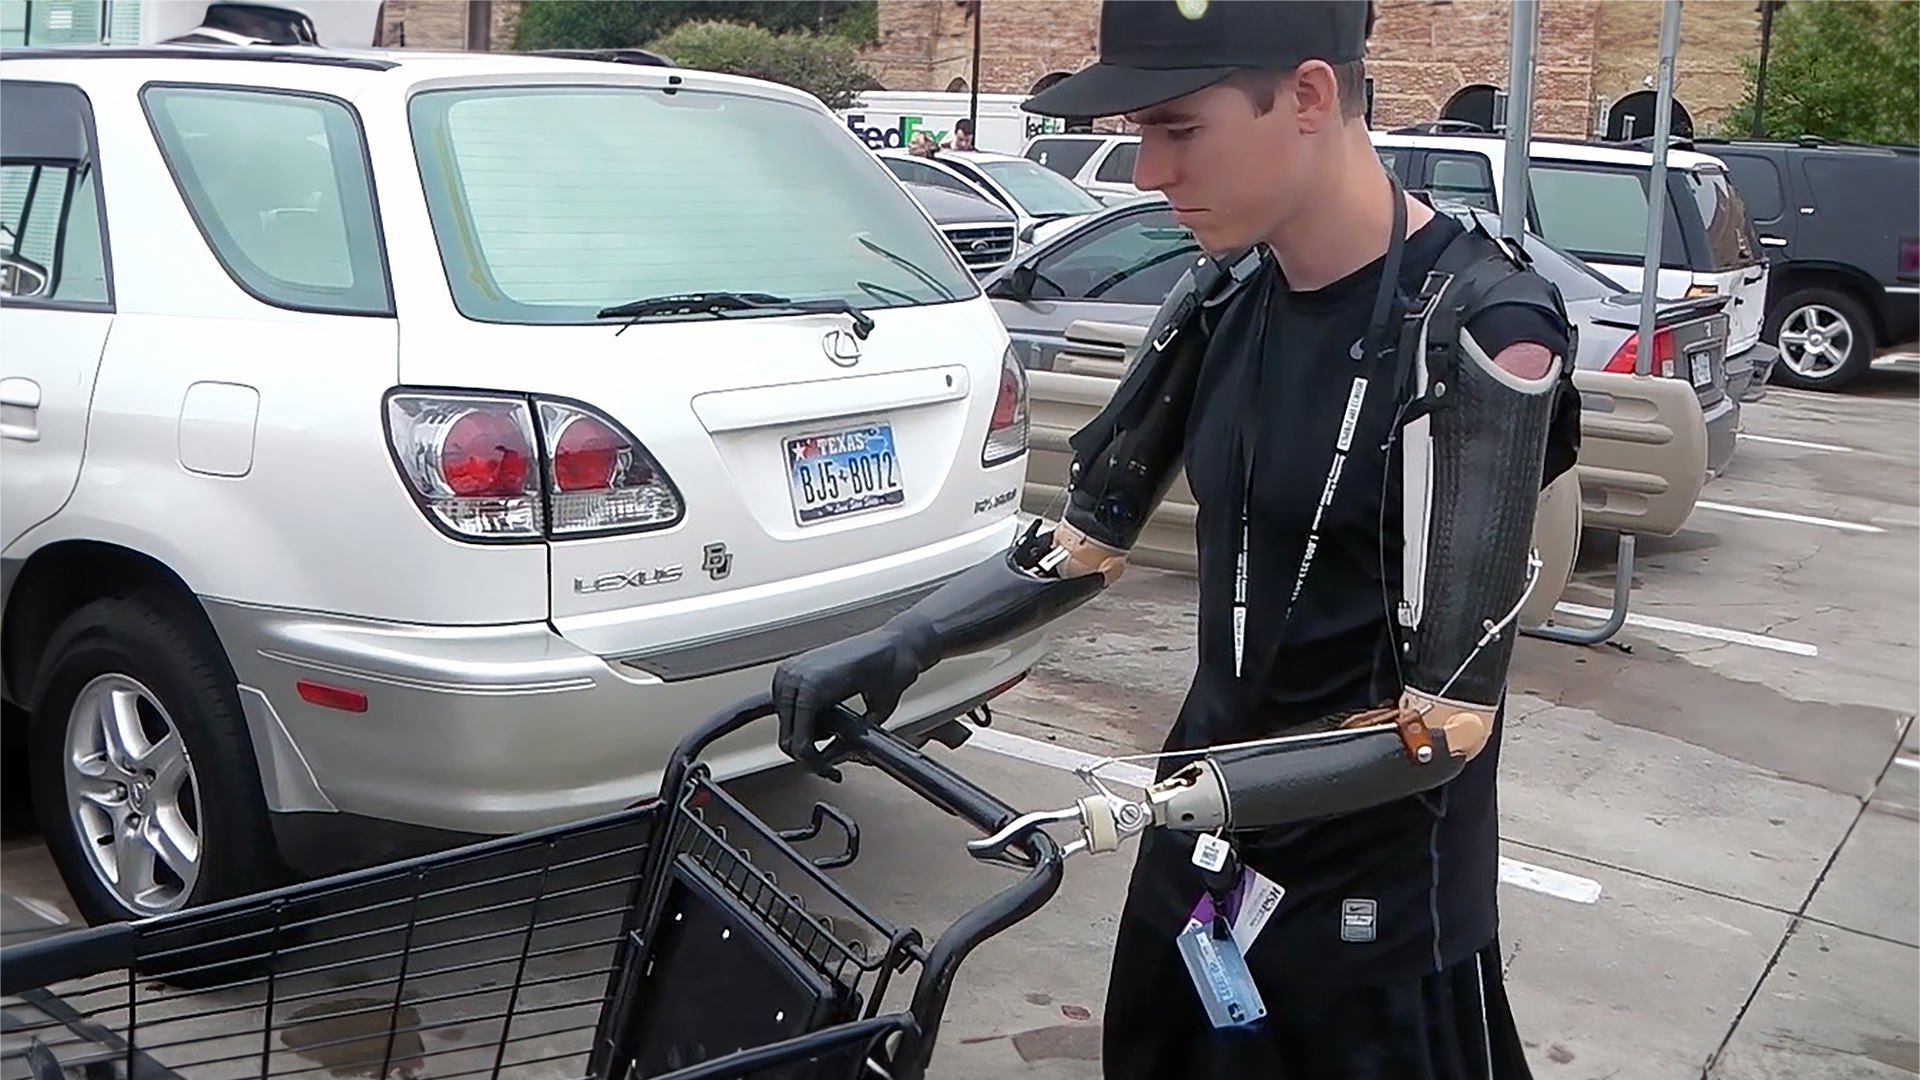 Justin Goodin is out shopping with his myoelectric i-limb hand and body-powered hook